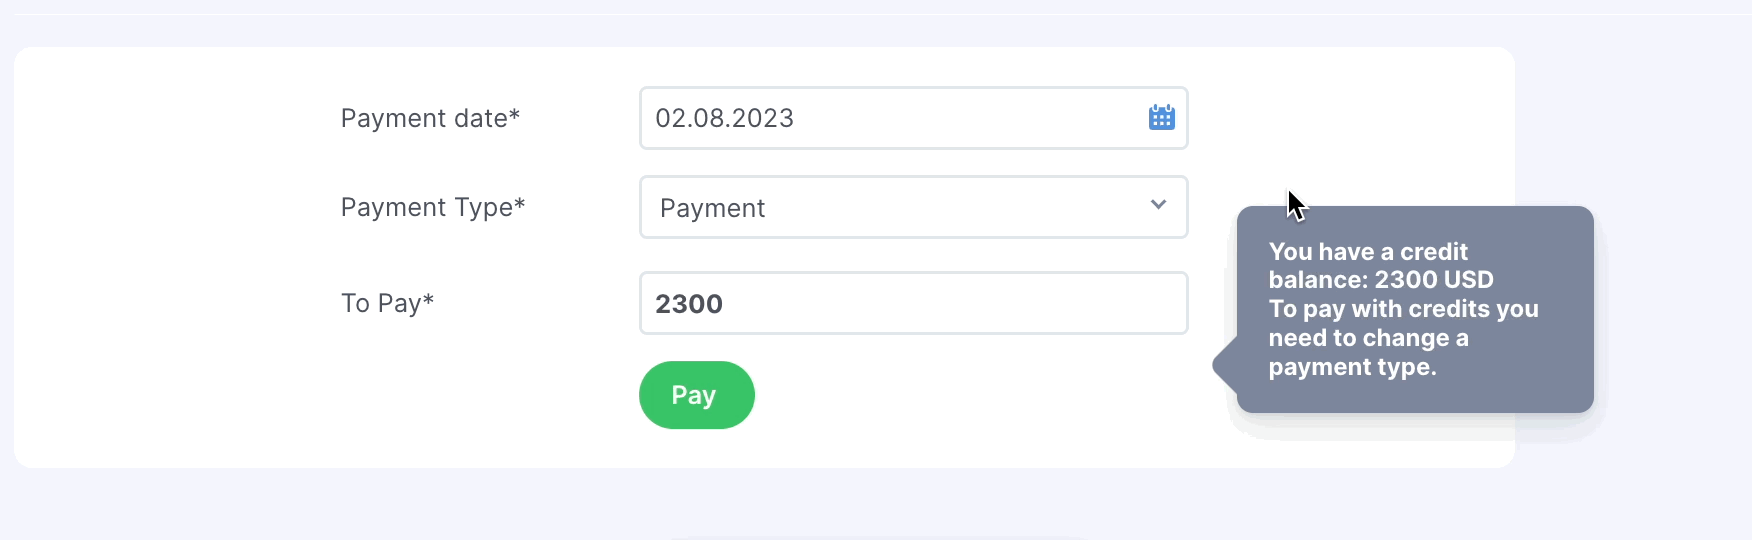 paying with credit note in precoro